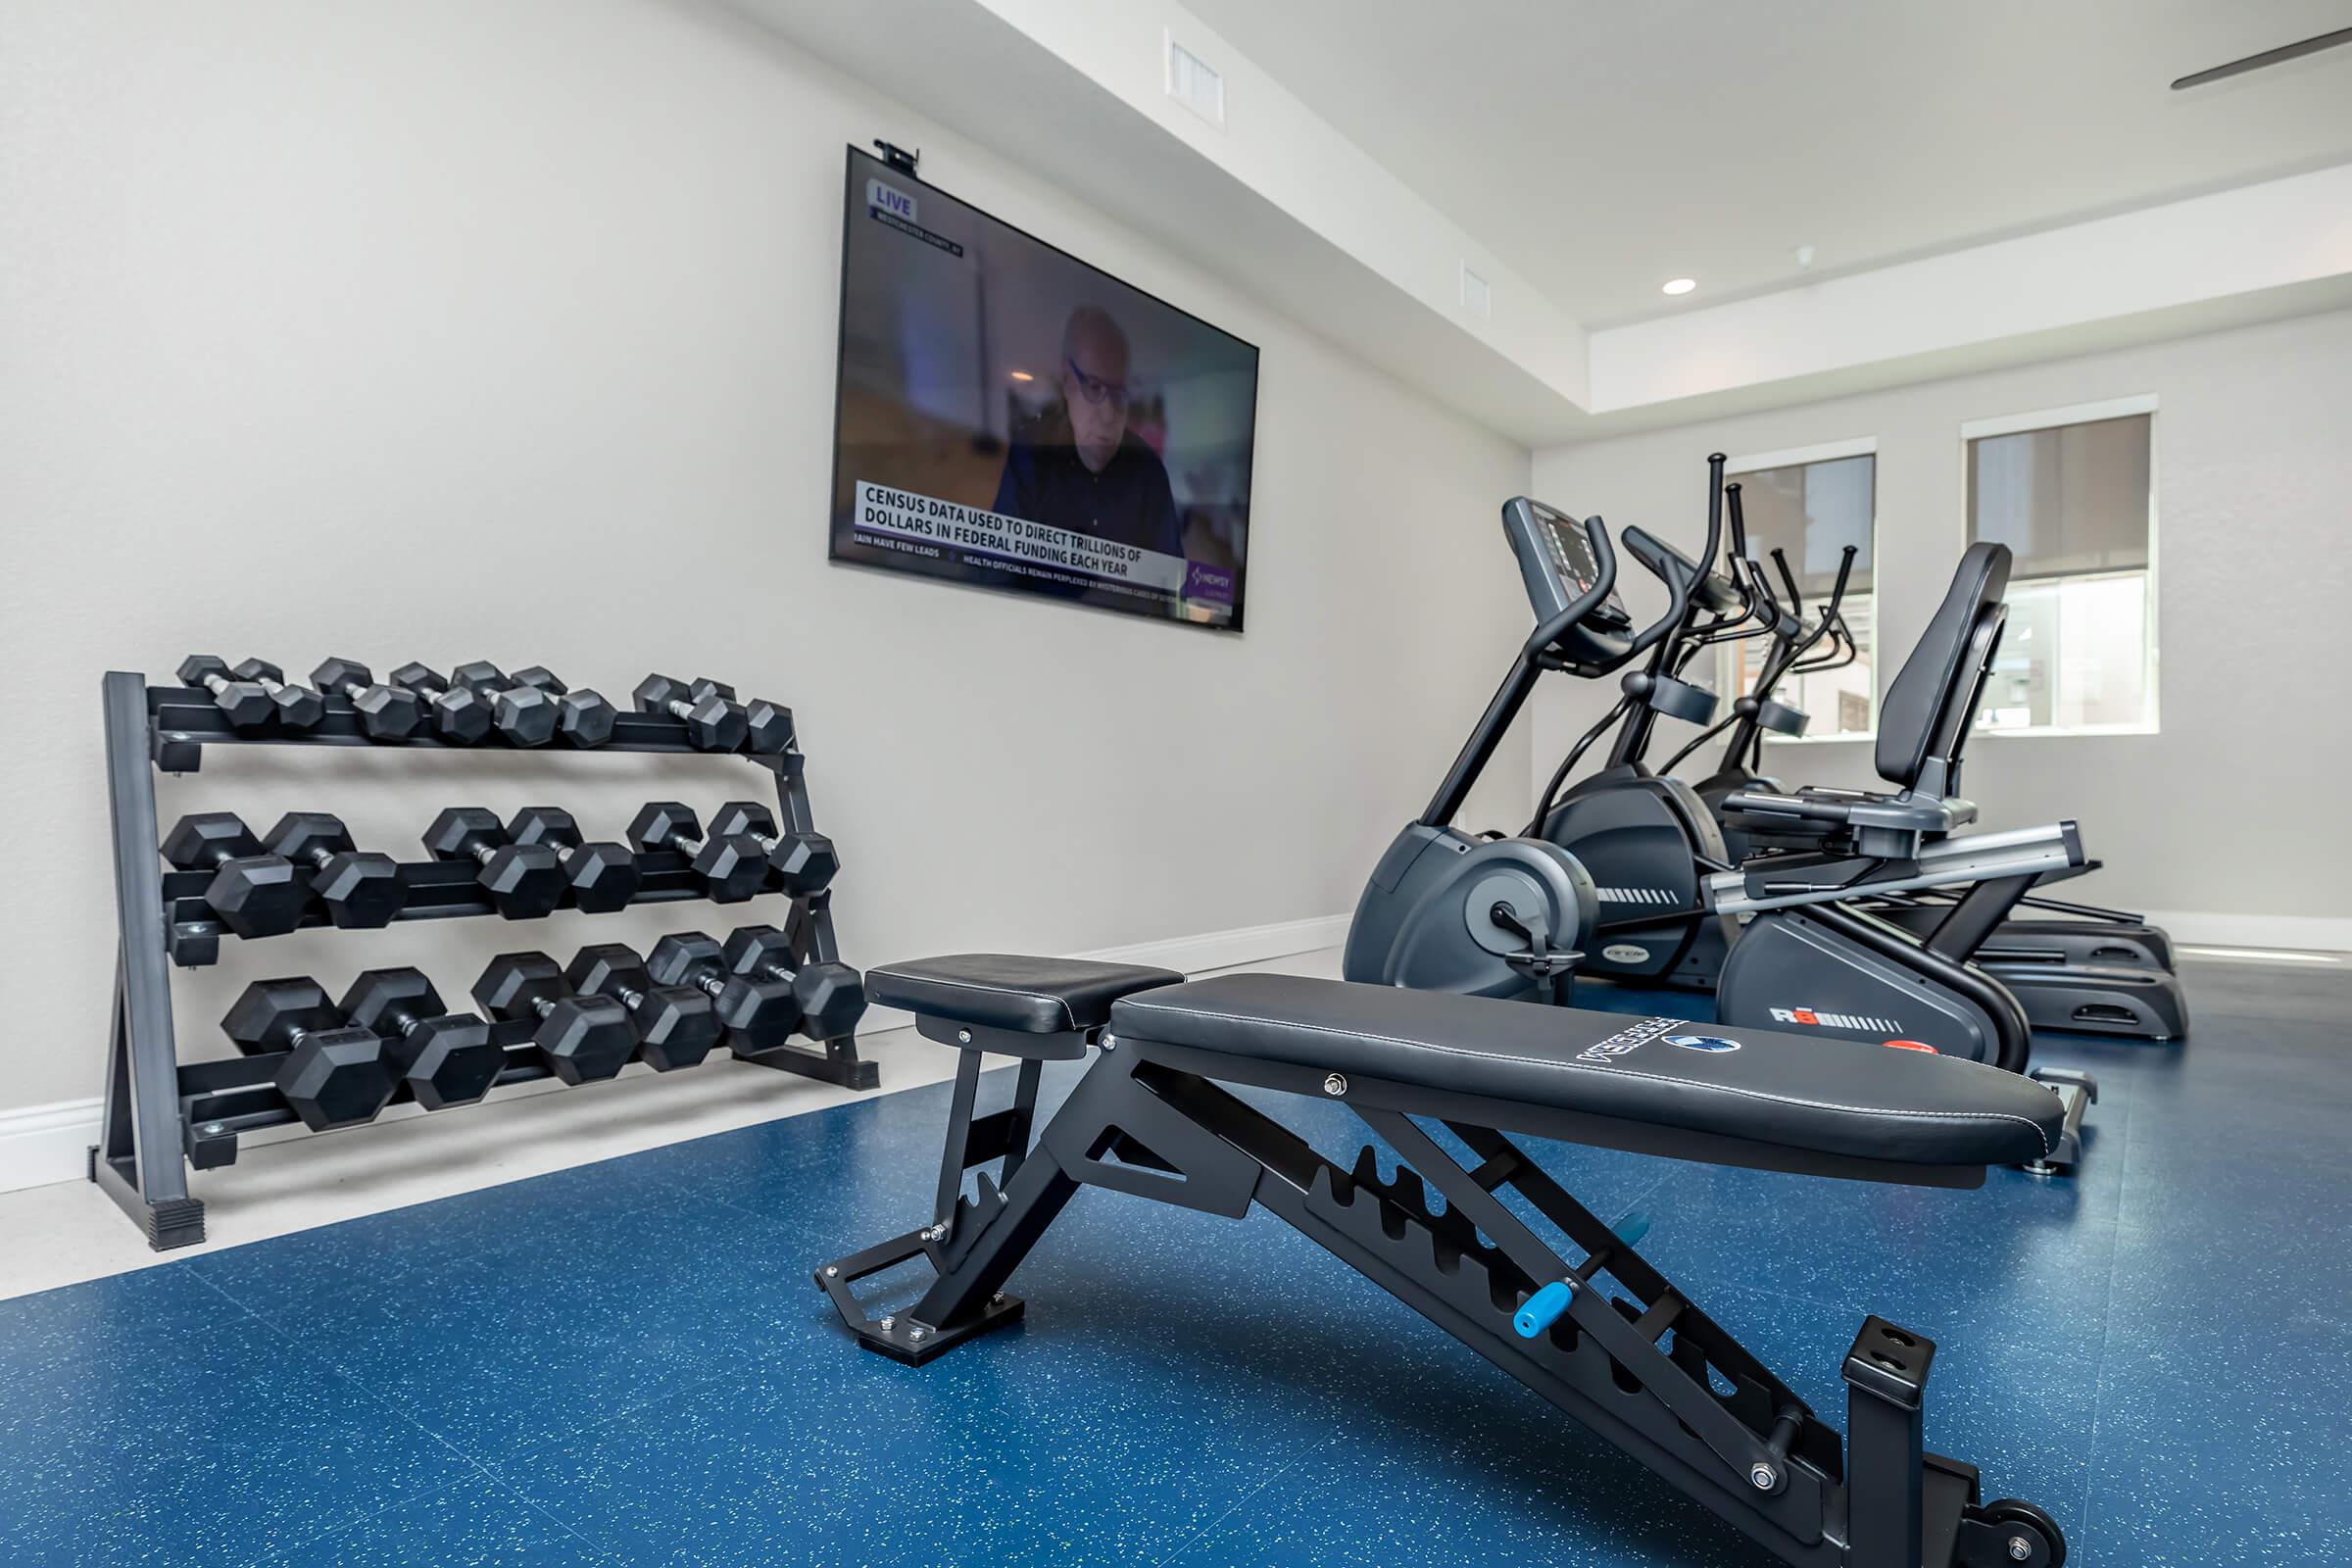 STAY FIT USING OUR STATE-OF-THE-ART FITNESS CENTER